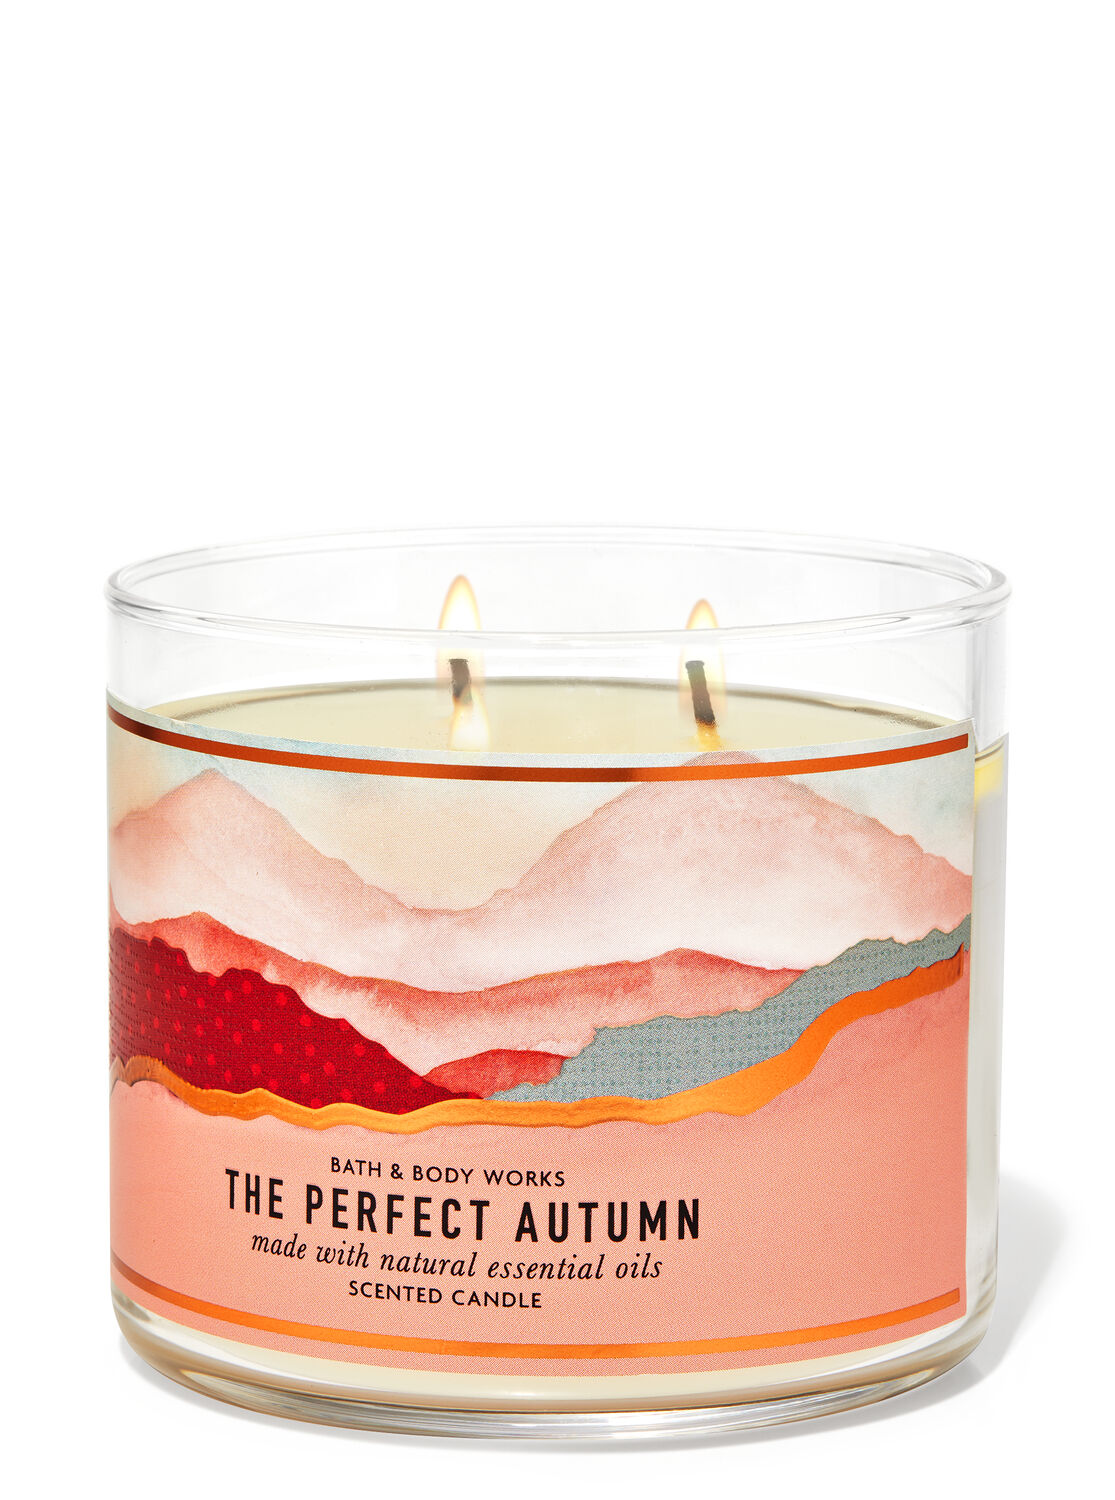 1 Bath & Body Works THE PERFECT AUTUMN Large 3-Wick Scented Candle 14.5 oz 